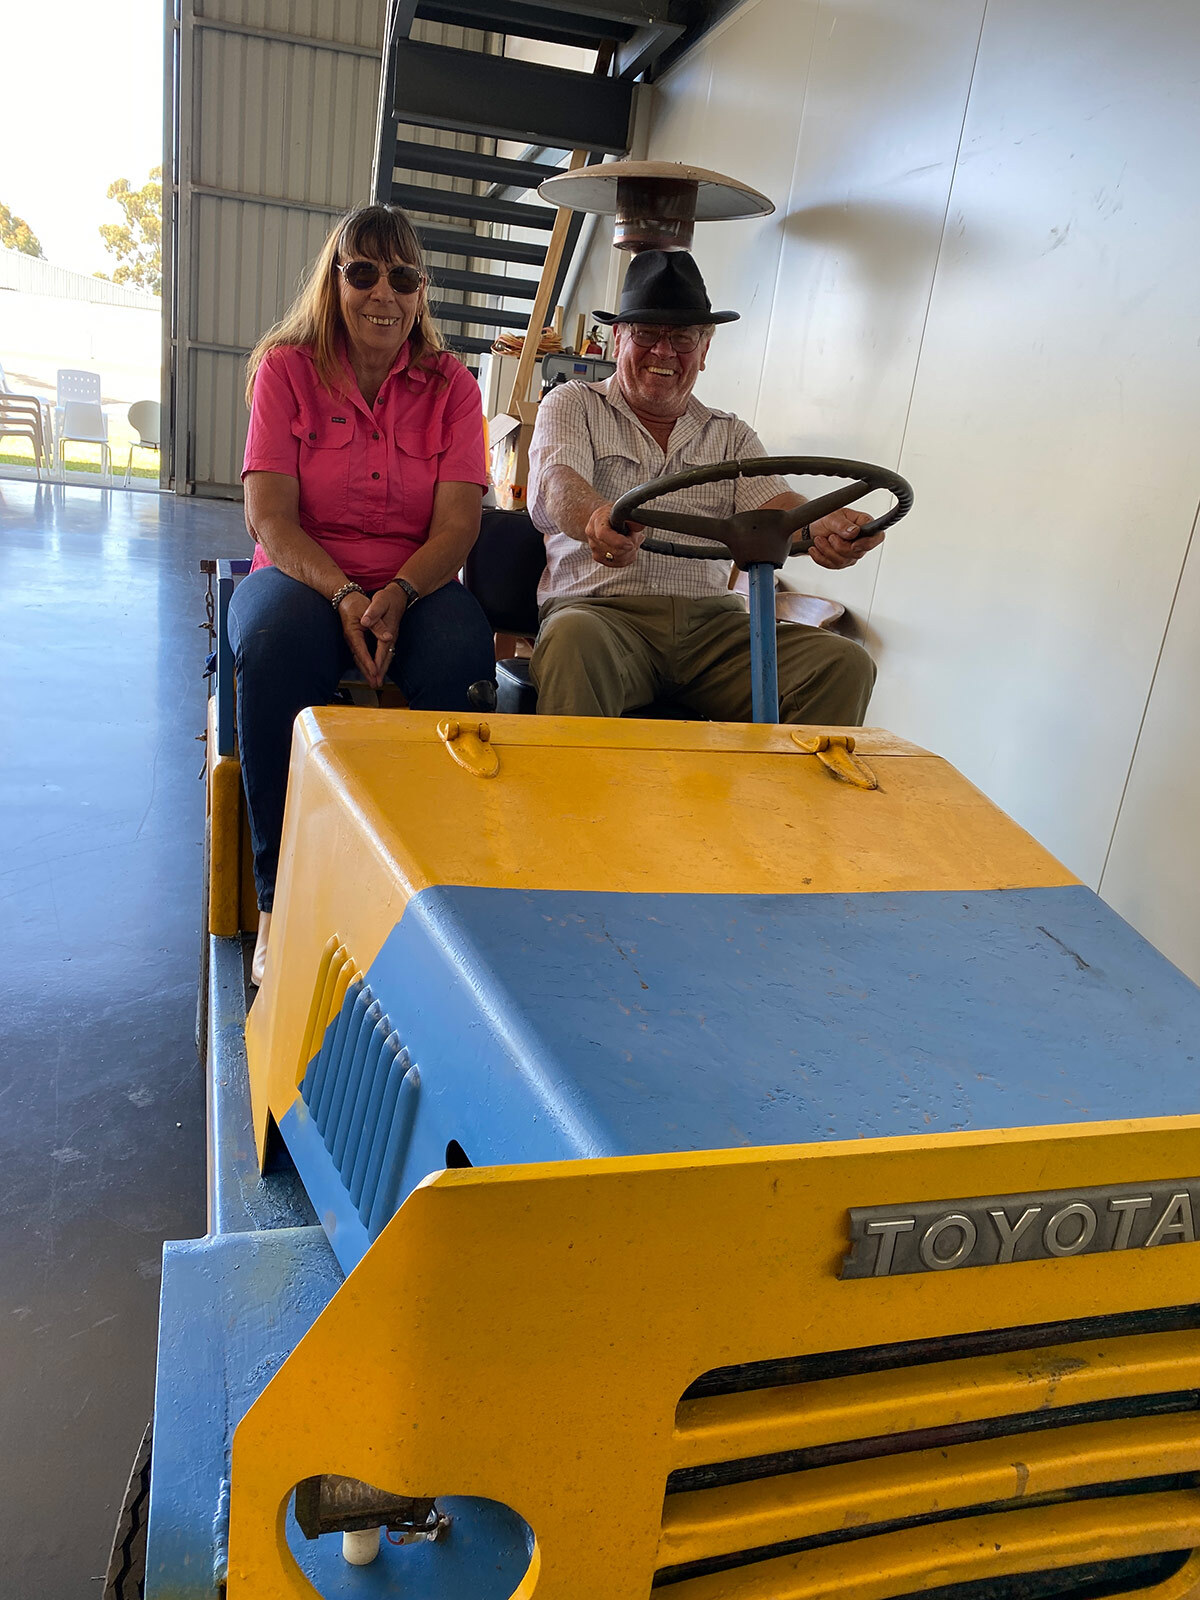 Fly Oz Ray and Cherie picked up hangar equipment